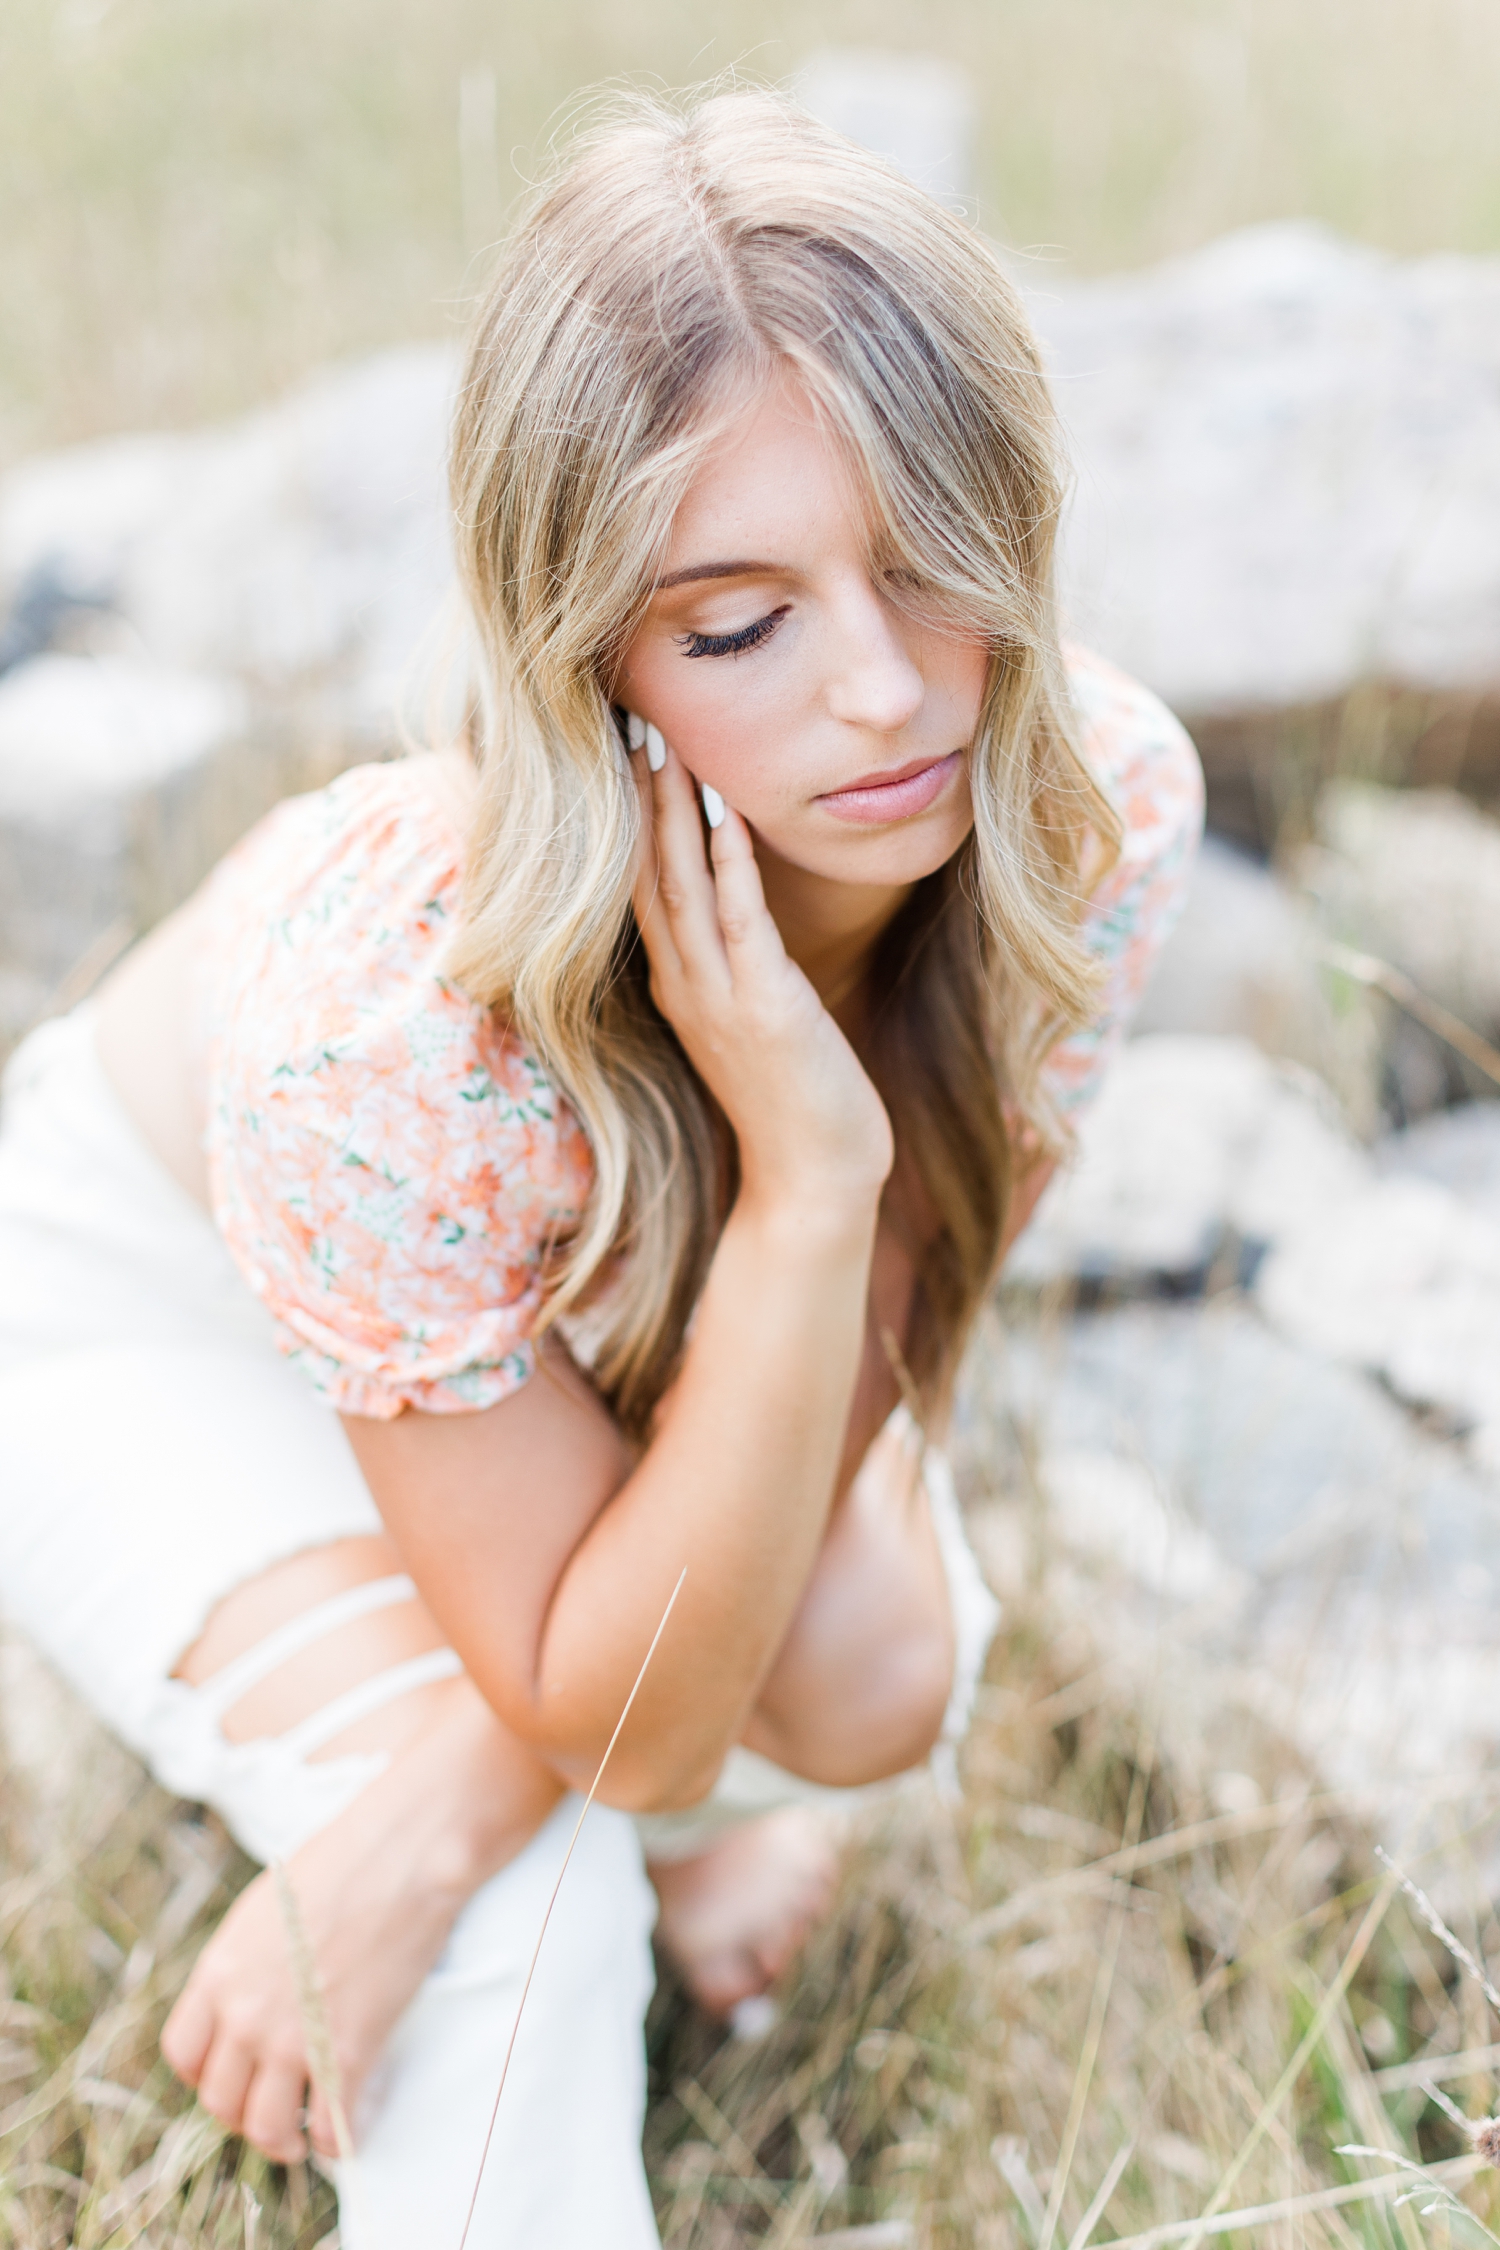 Eden looks down as she sits on large stones in the middle of a grassy field | CB Studio